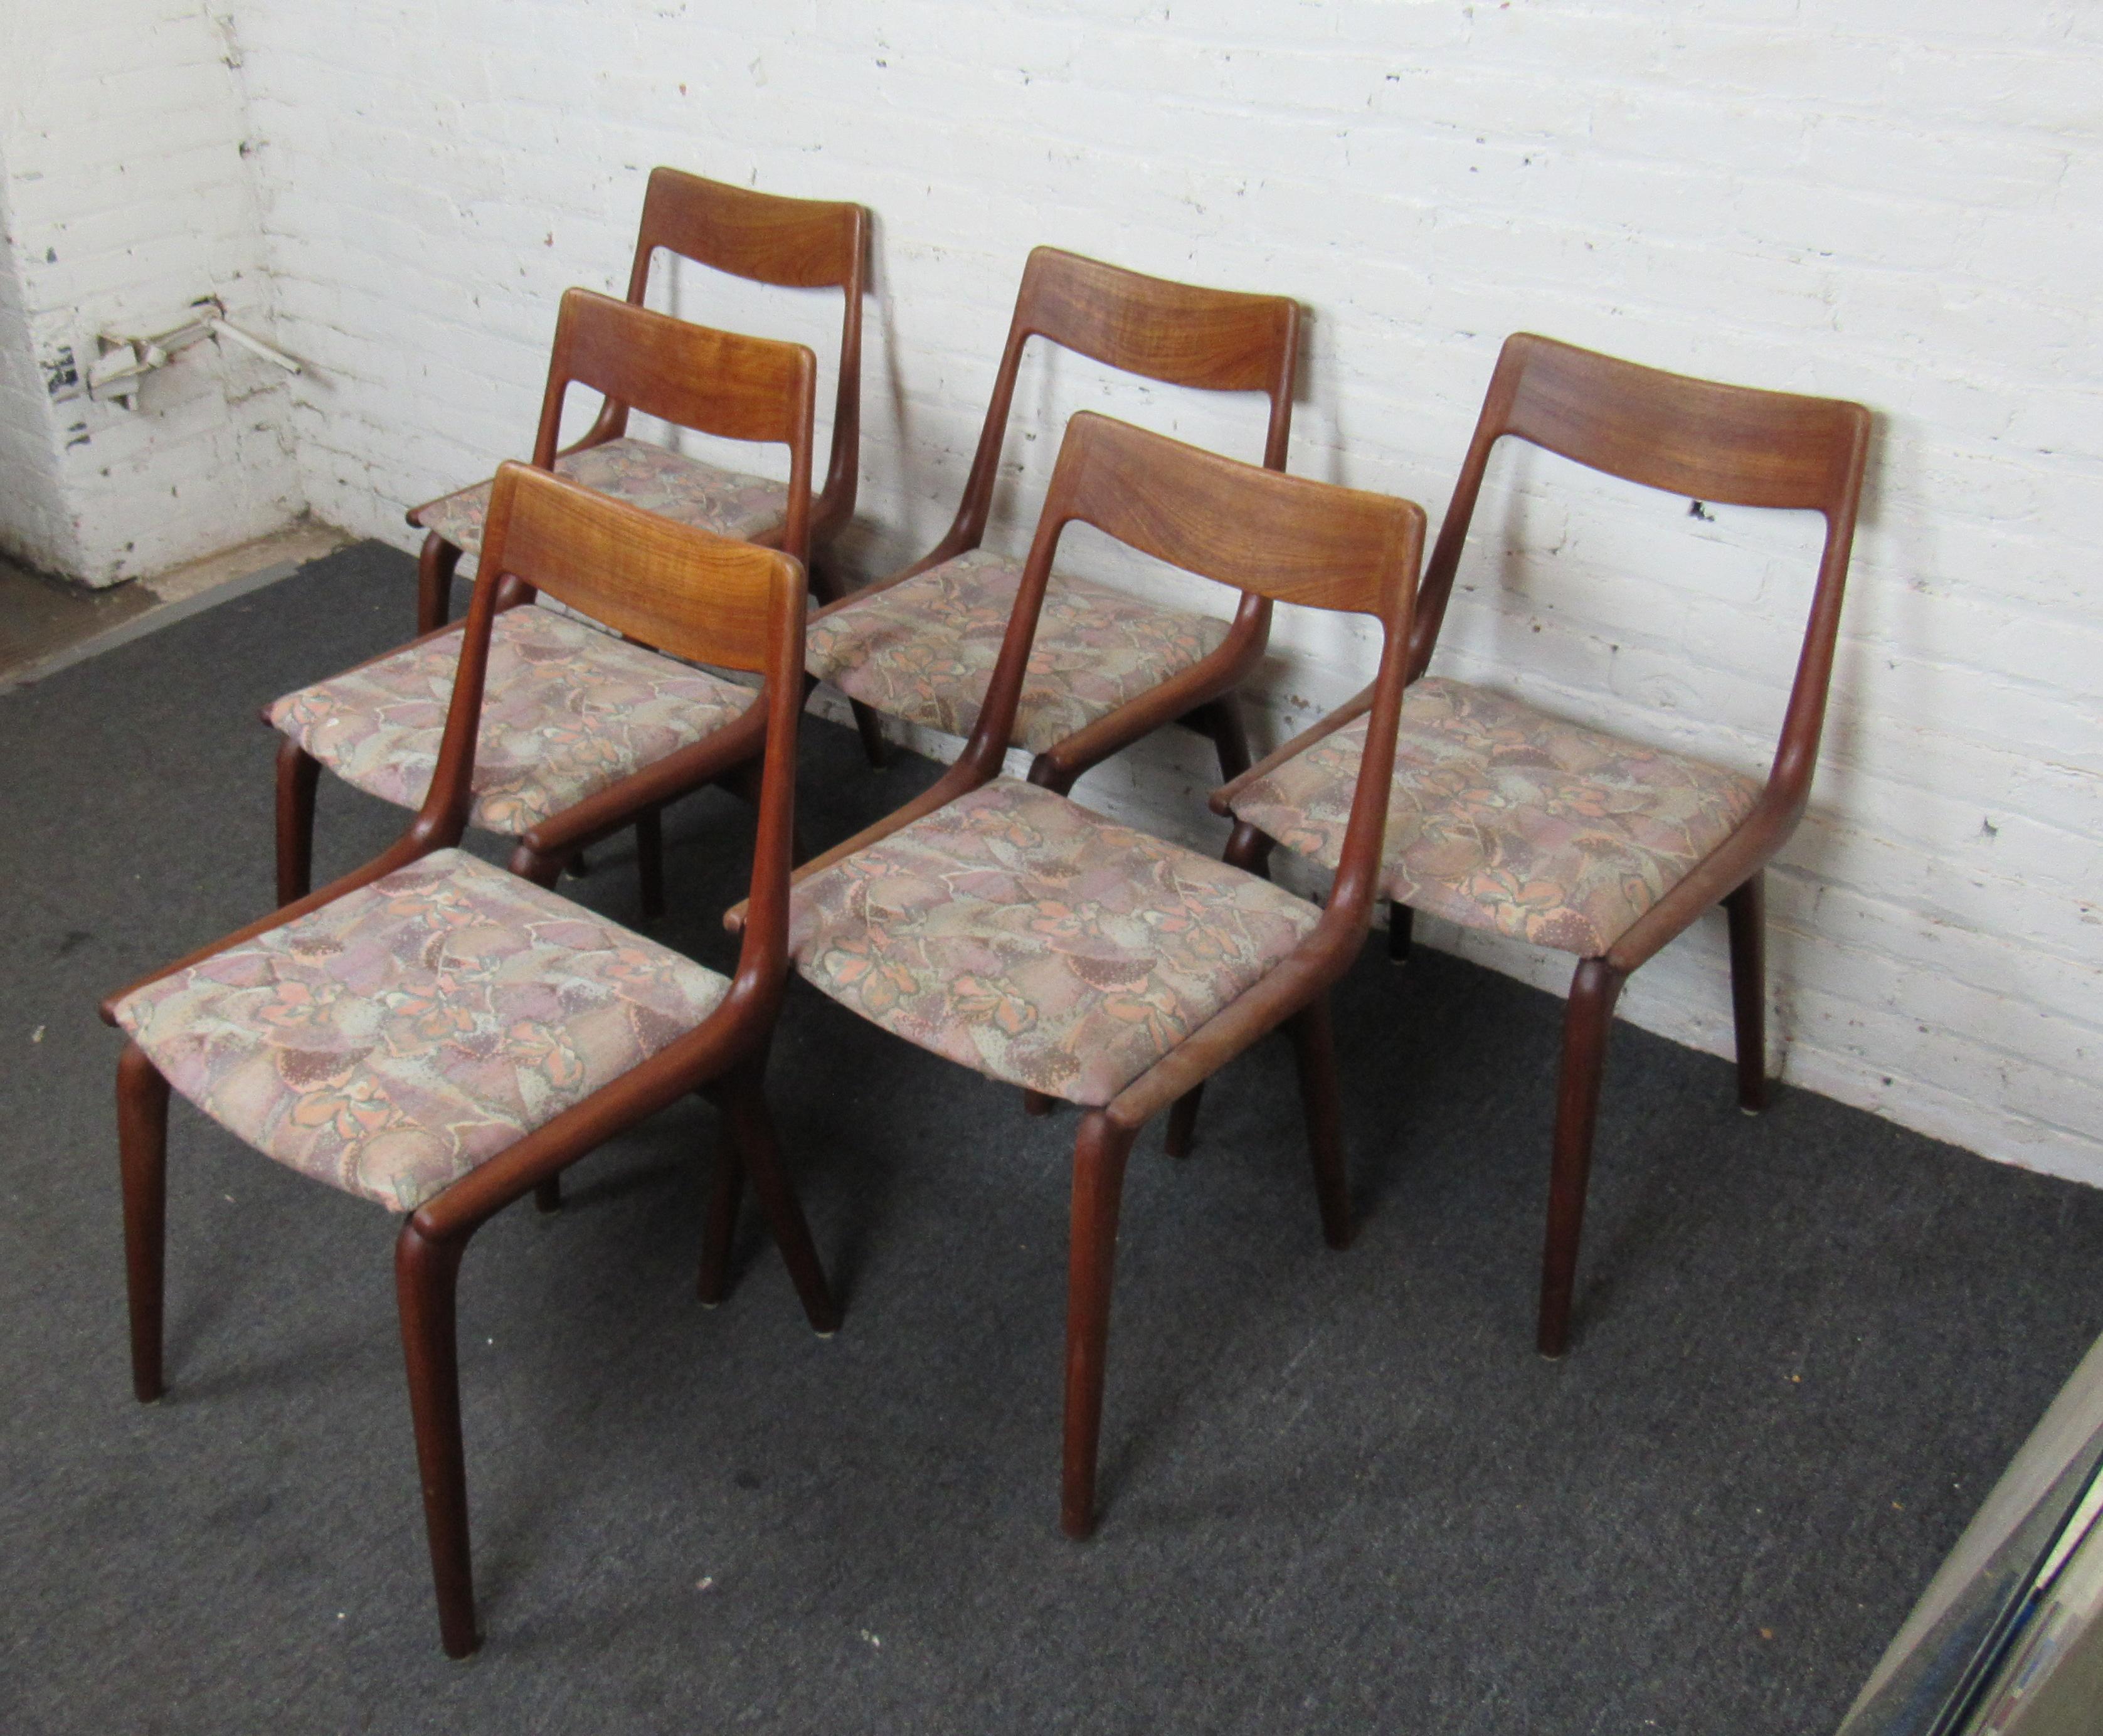 Set of 6 Danish designed and made chairs. These unique chairs have a teak frame and flower fabric seat. 
(Please confirm item location - NY or NJ - with dealer).
 